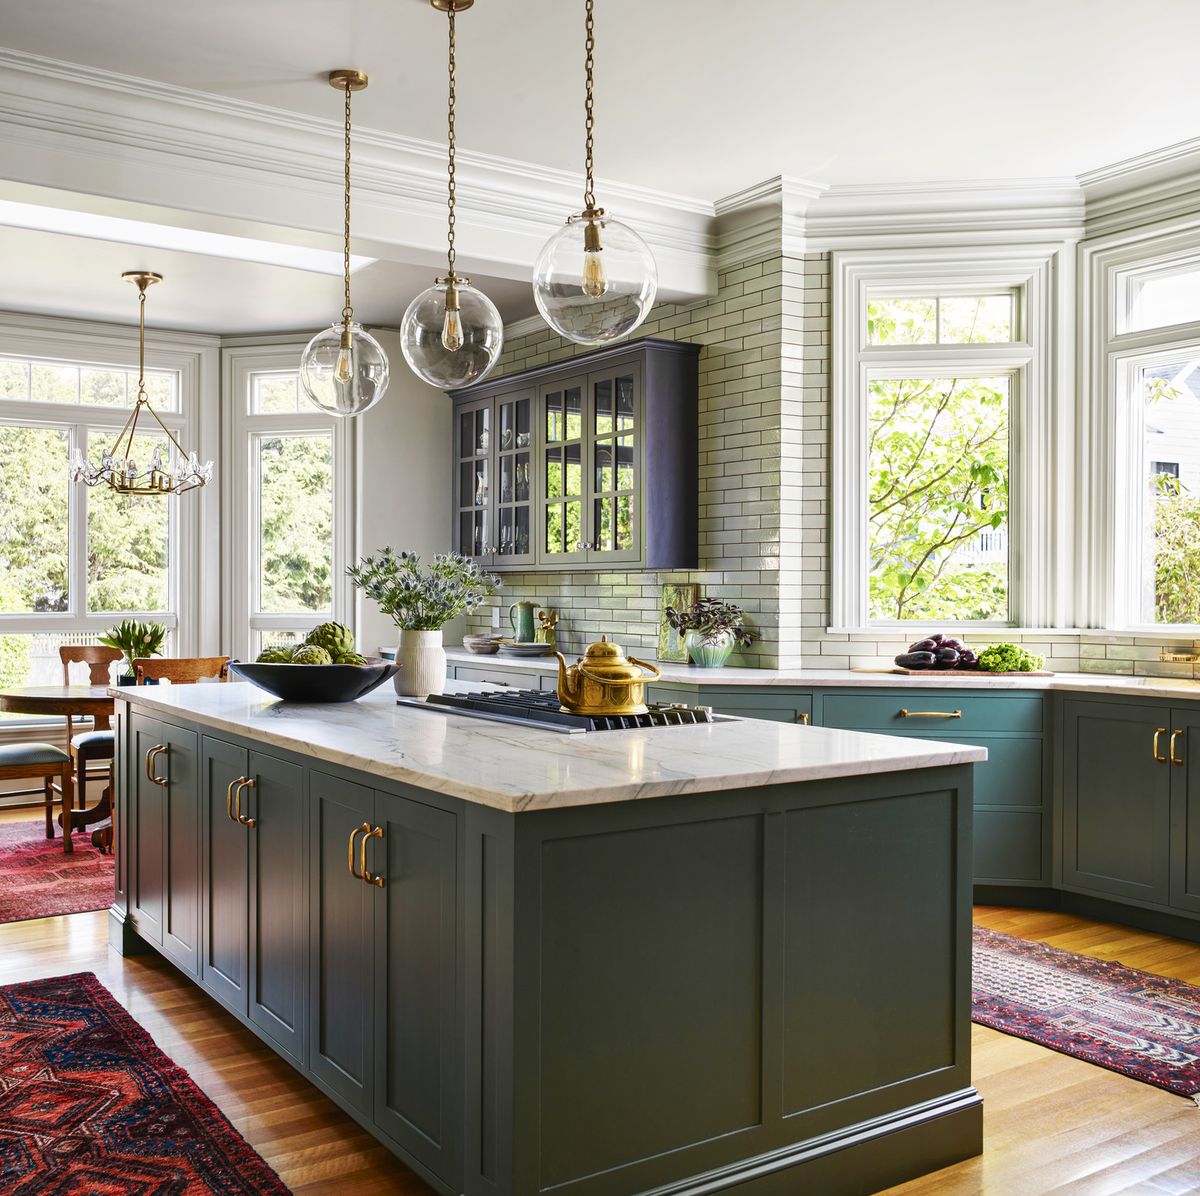 How To Paint Kitchen Cabinets Best